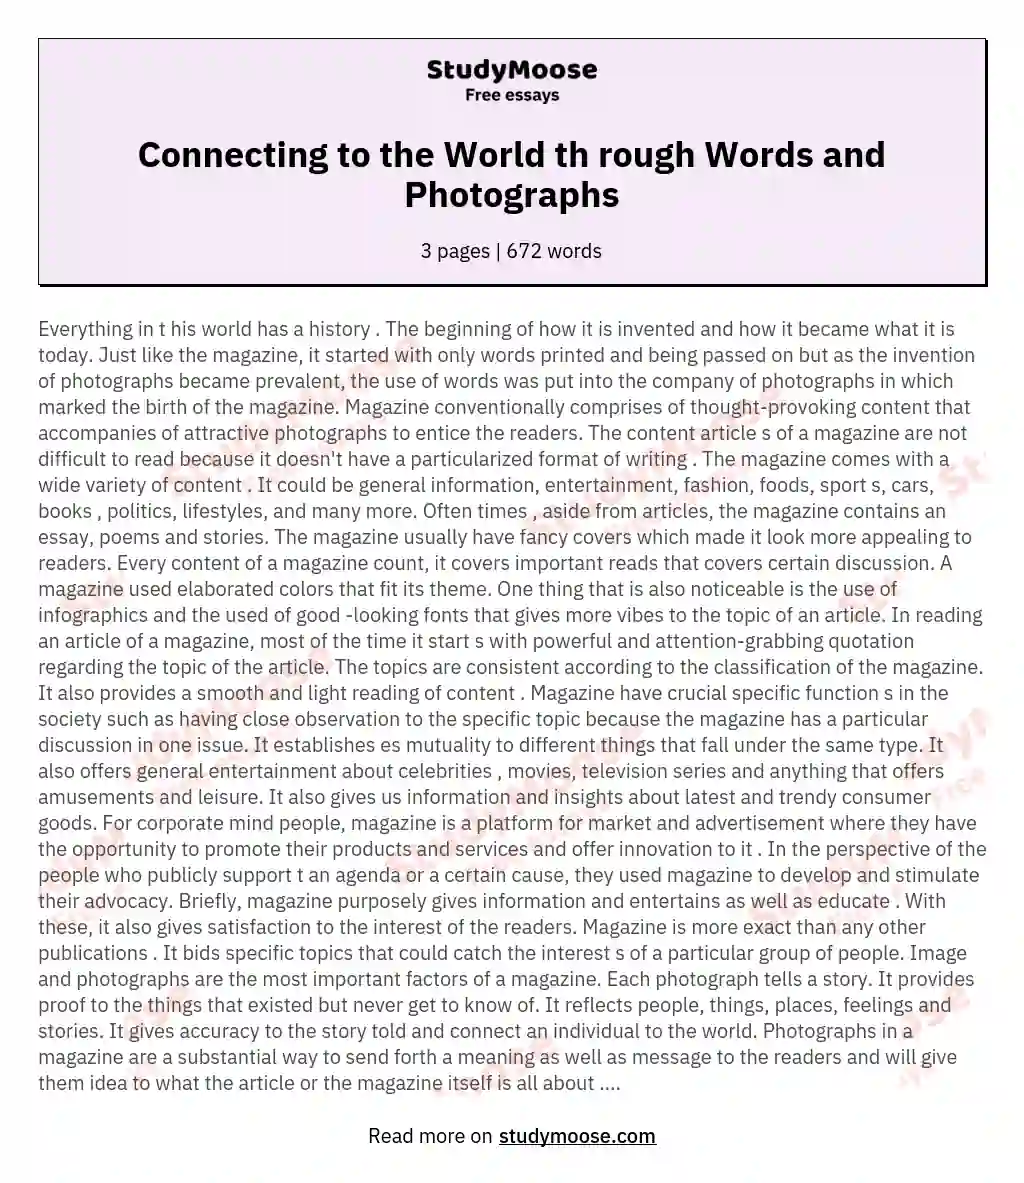 Connecting to the World th rough Words and Photographs essay